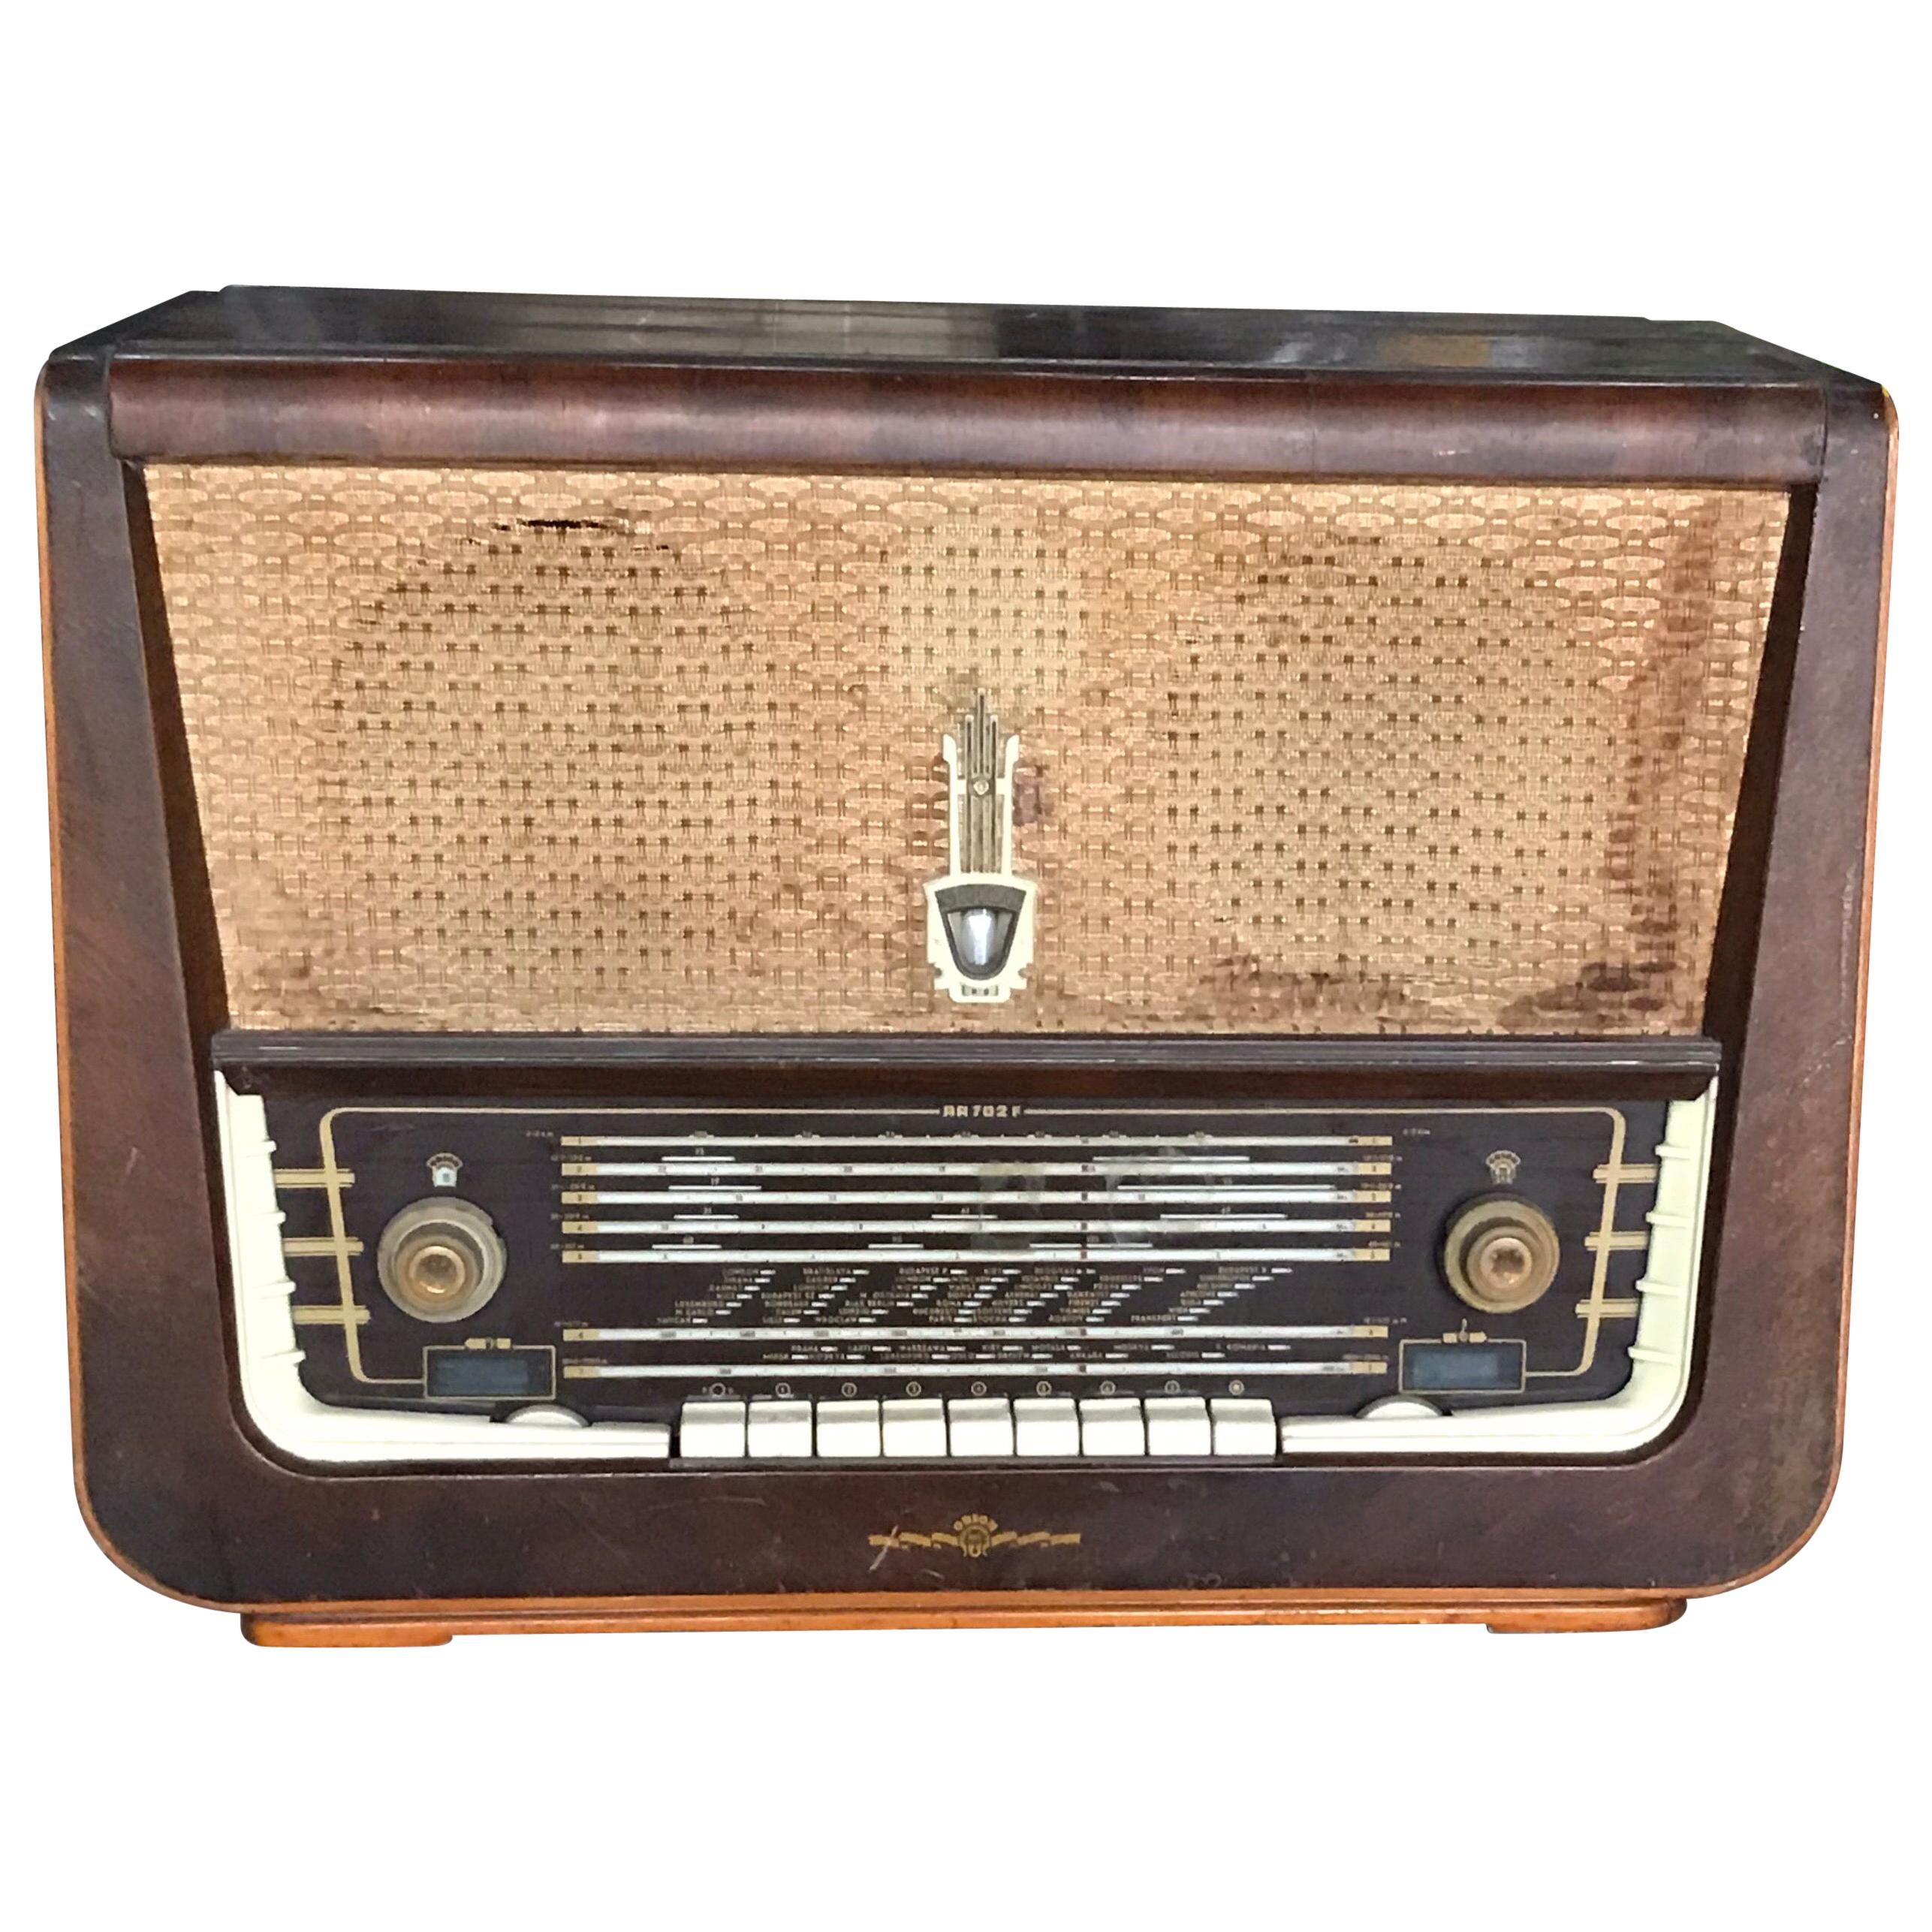 Radio from Orion, 1920s Typ :Orion - AR 702 F For Sale at 1stDibs | 1920s  radio, 1920 radio, radio 1920s